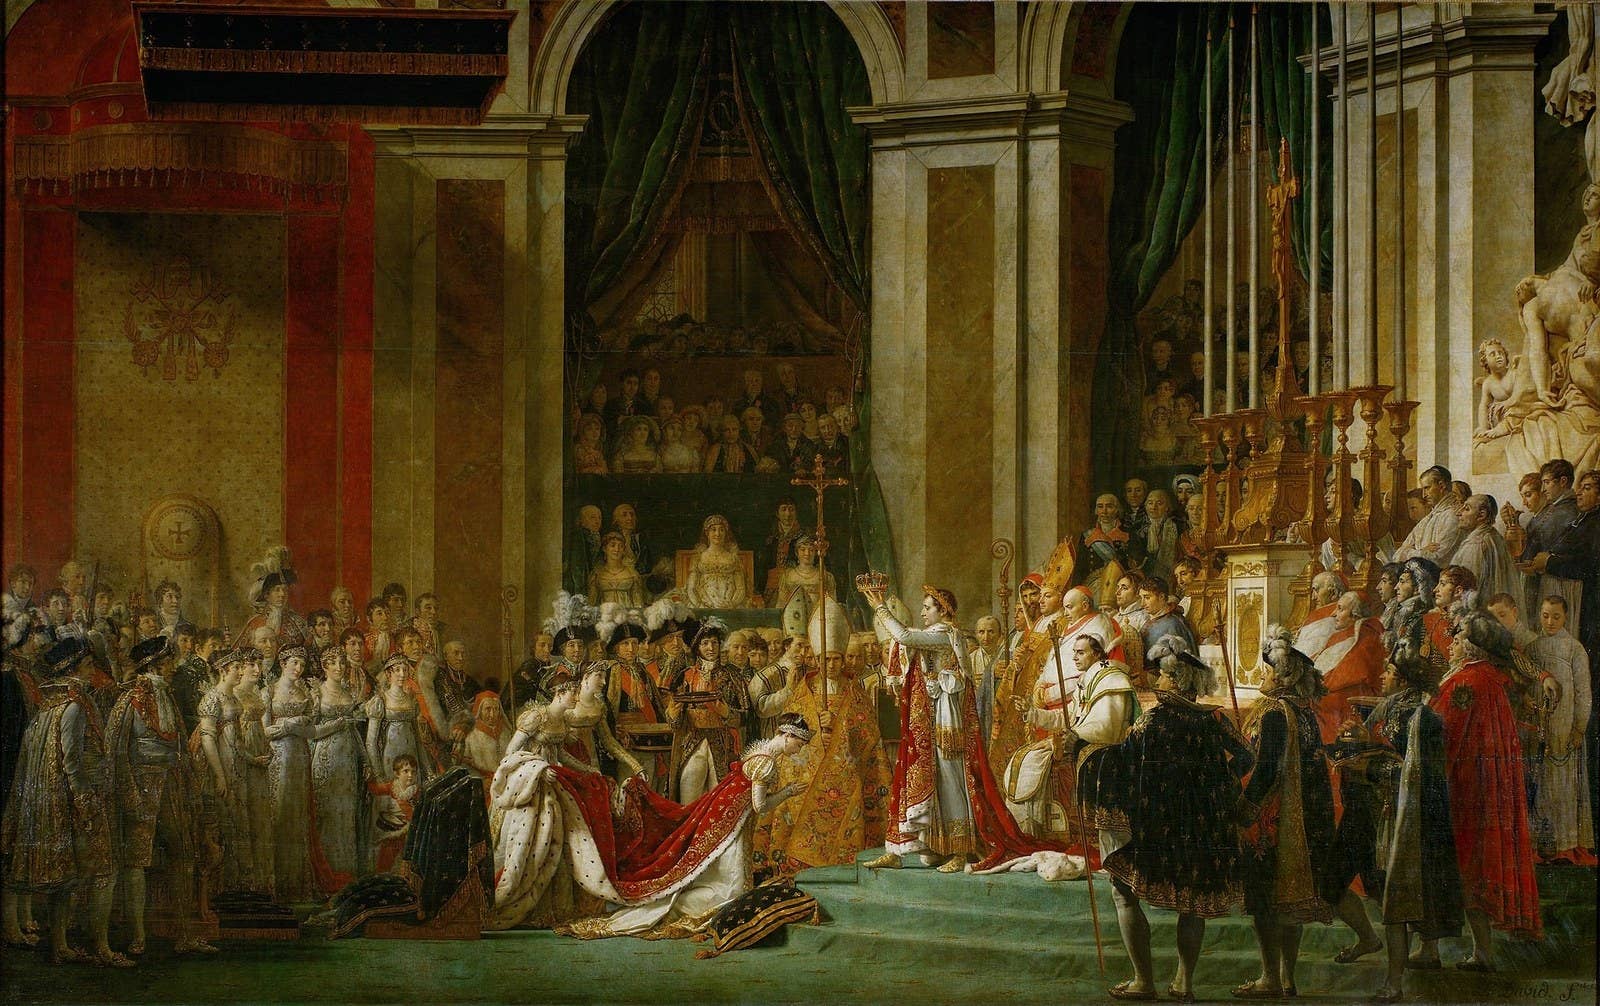 Joséphine kneels before Napoléon I during his coronation at Notre Dame.